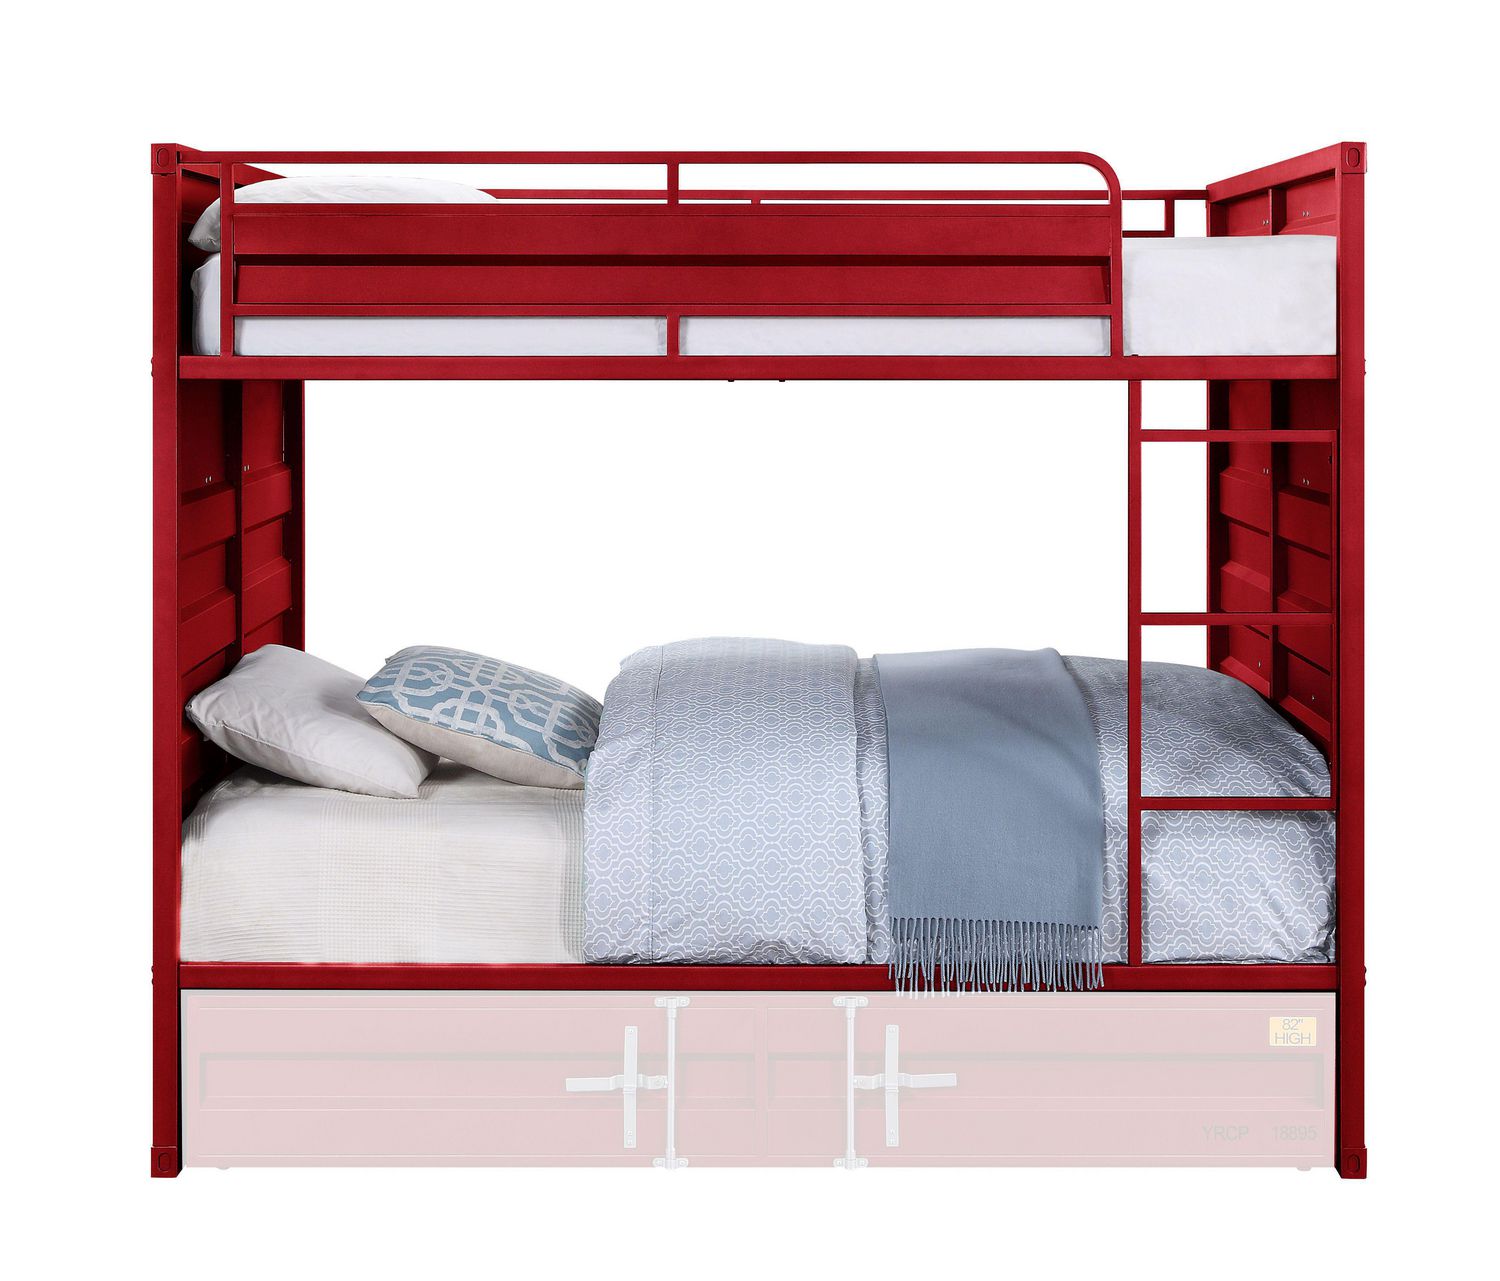 Acme Cargo Full Bunk Bed In Red, Red Bunk Beds